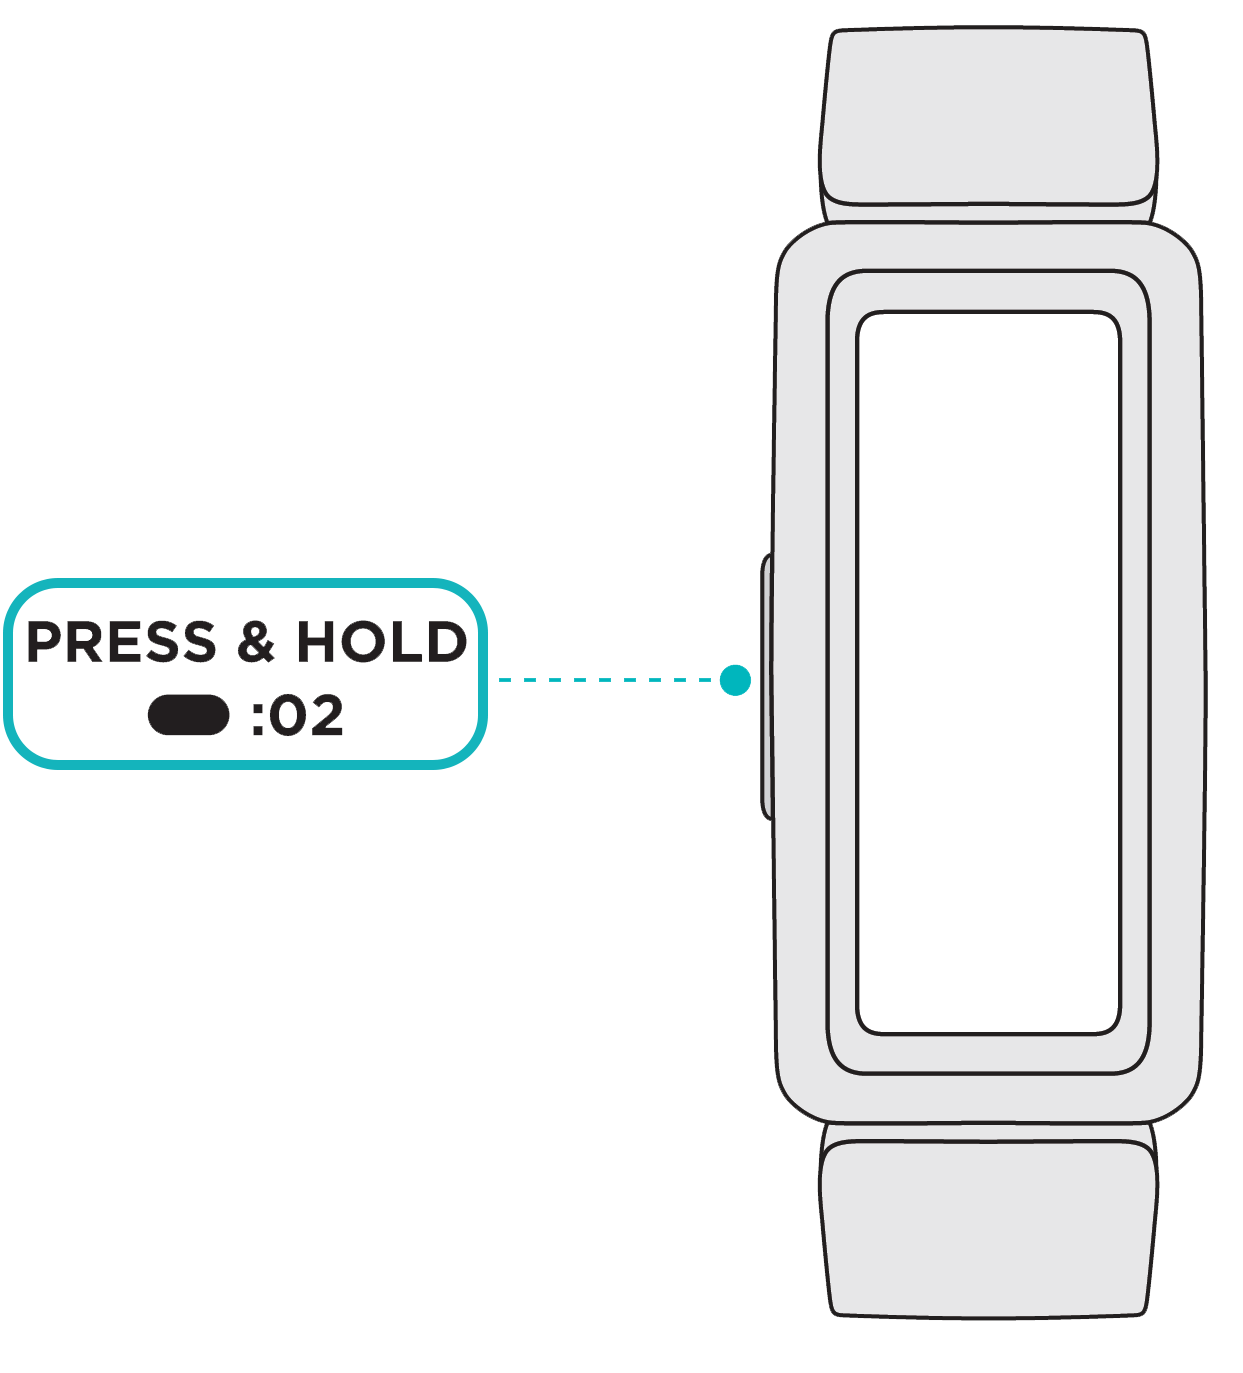 Tracker with the button highlighted and text indicating to press and hold it for 2 seconds